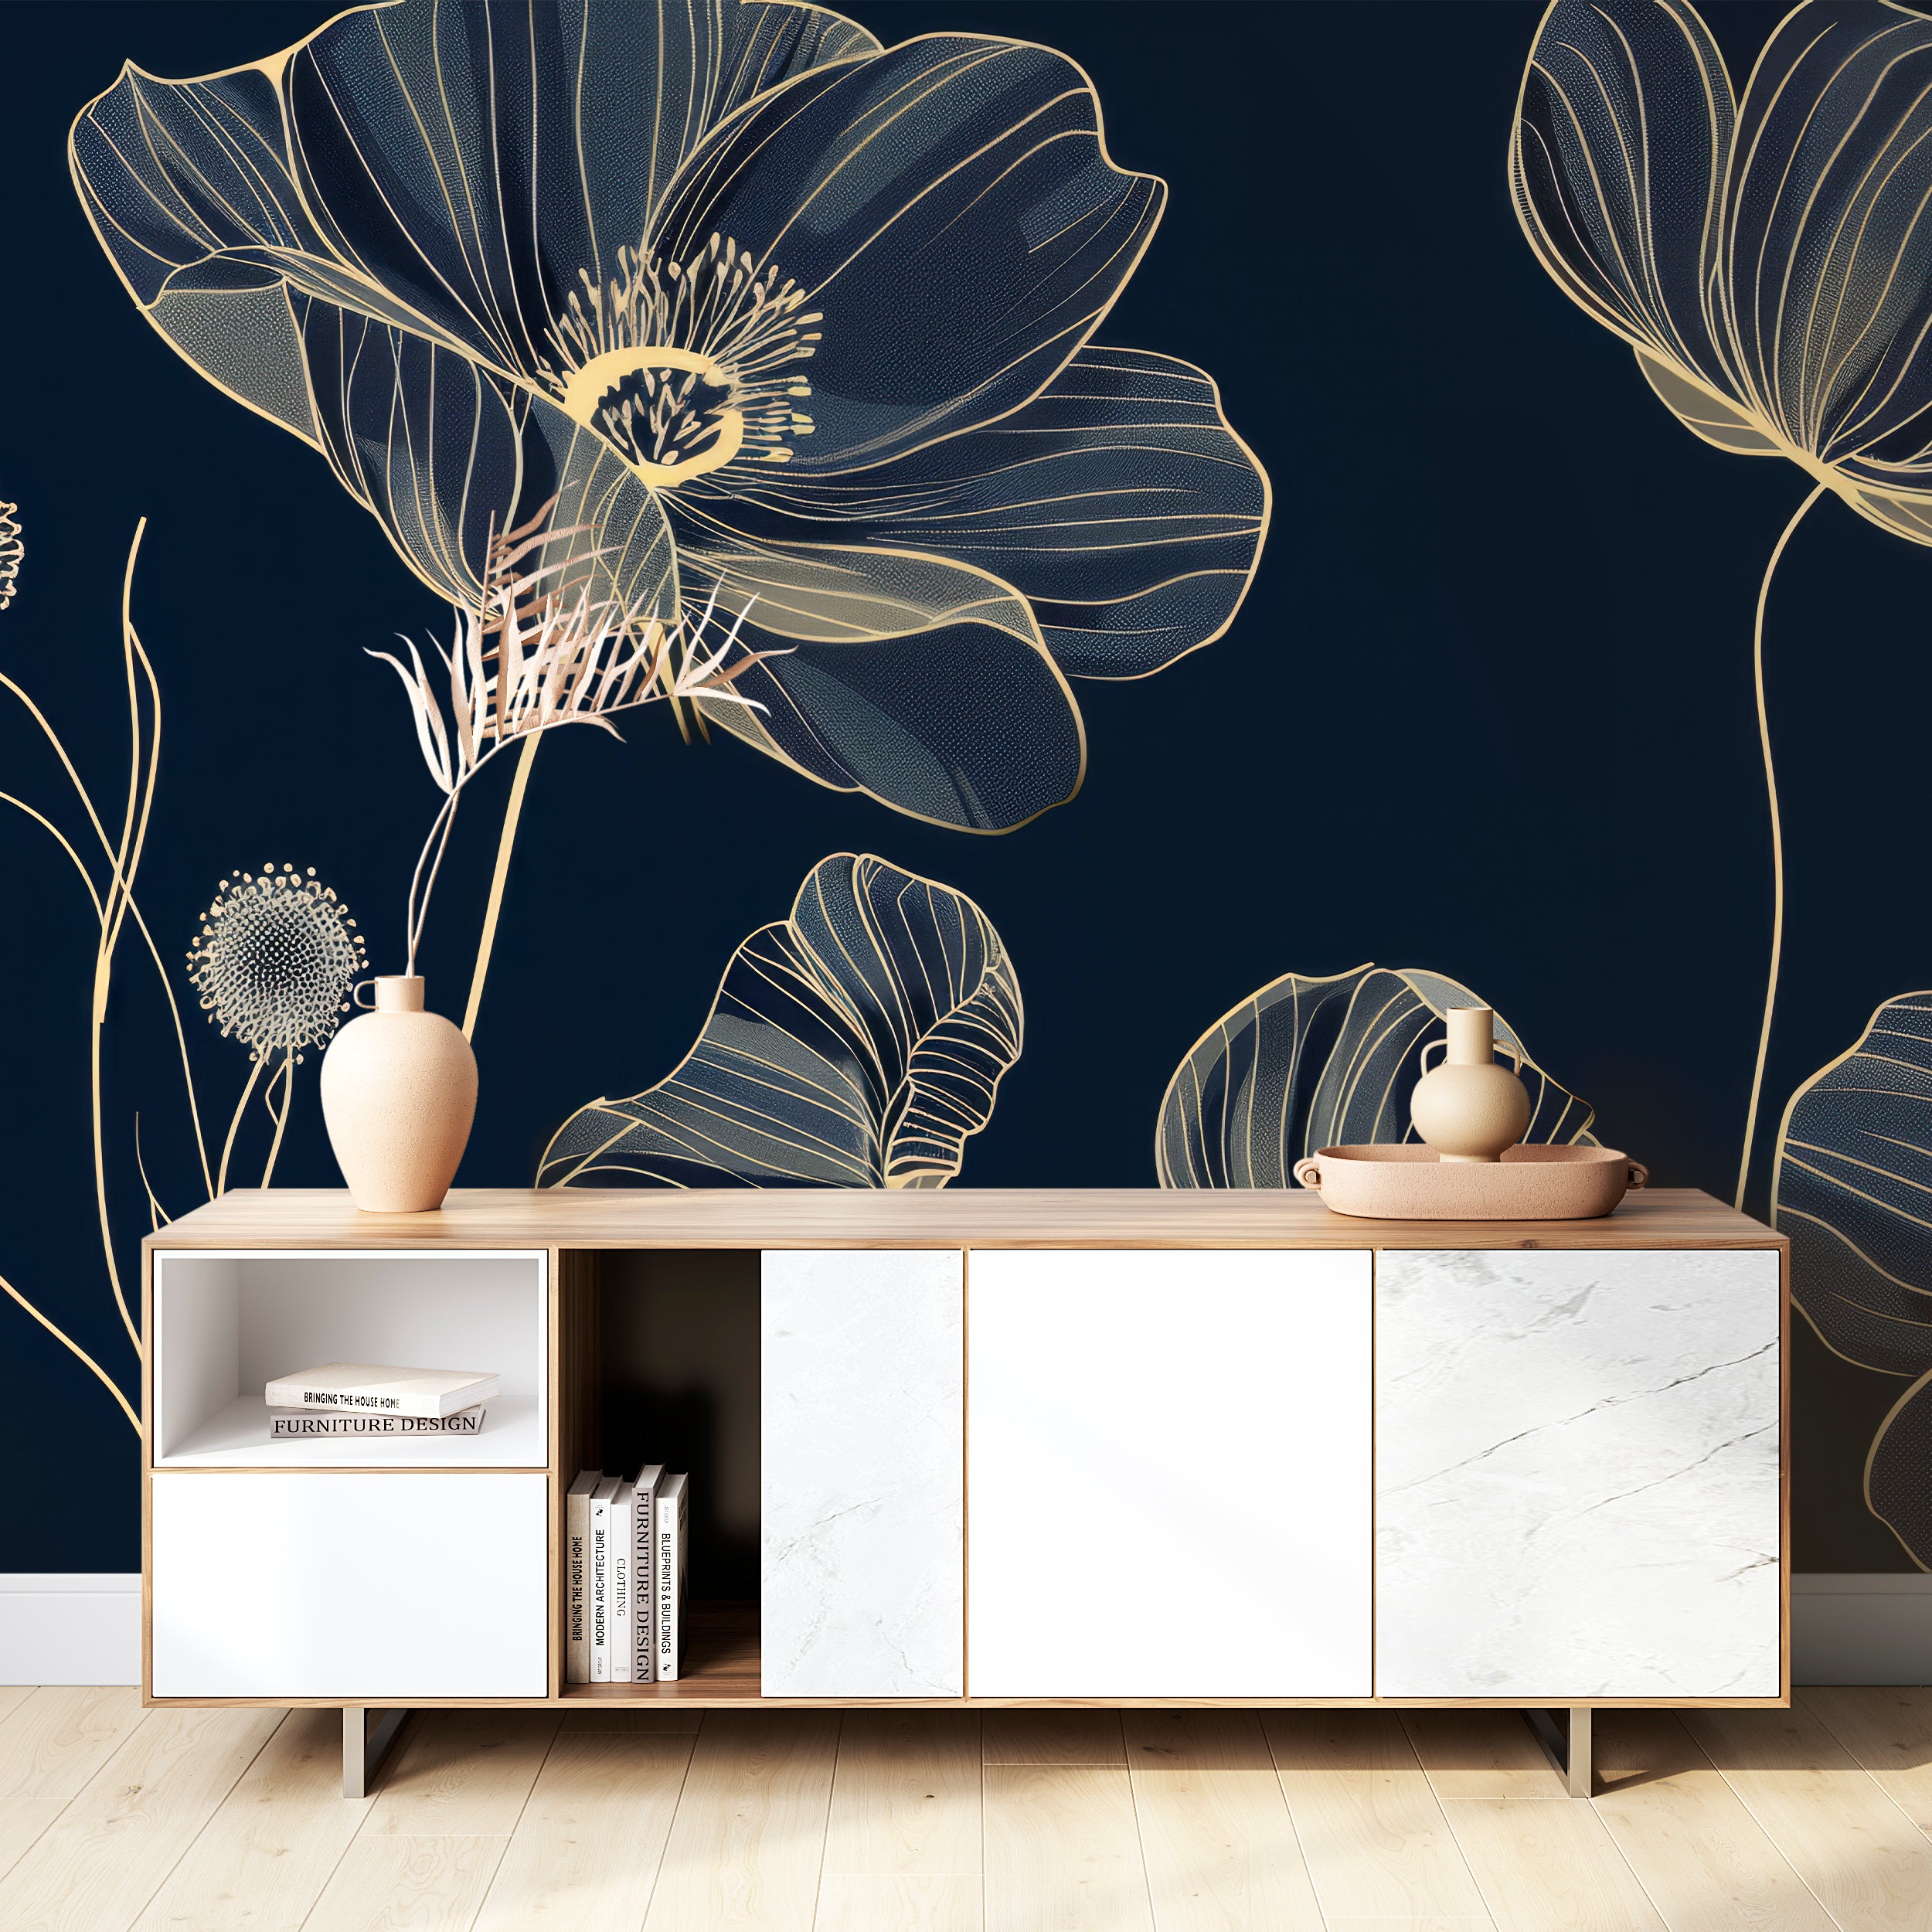 Cosmos Épanouis: Panoramic Midnight Blue Wallpaper with Floral Patterns